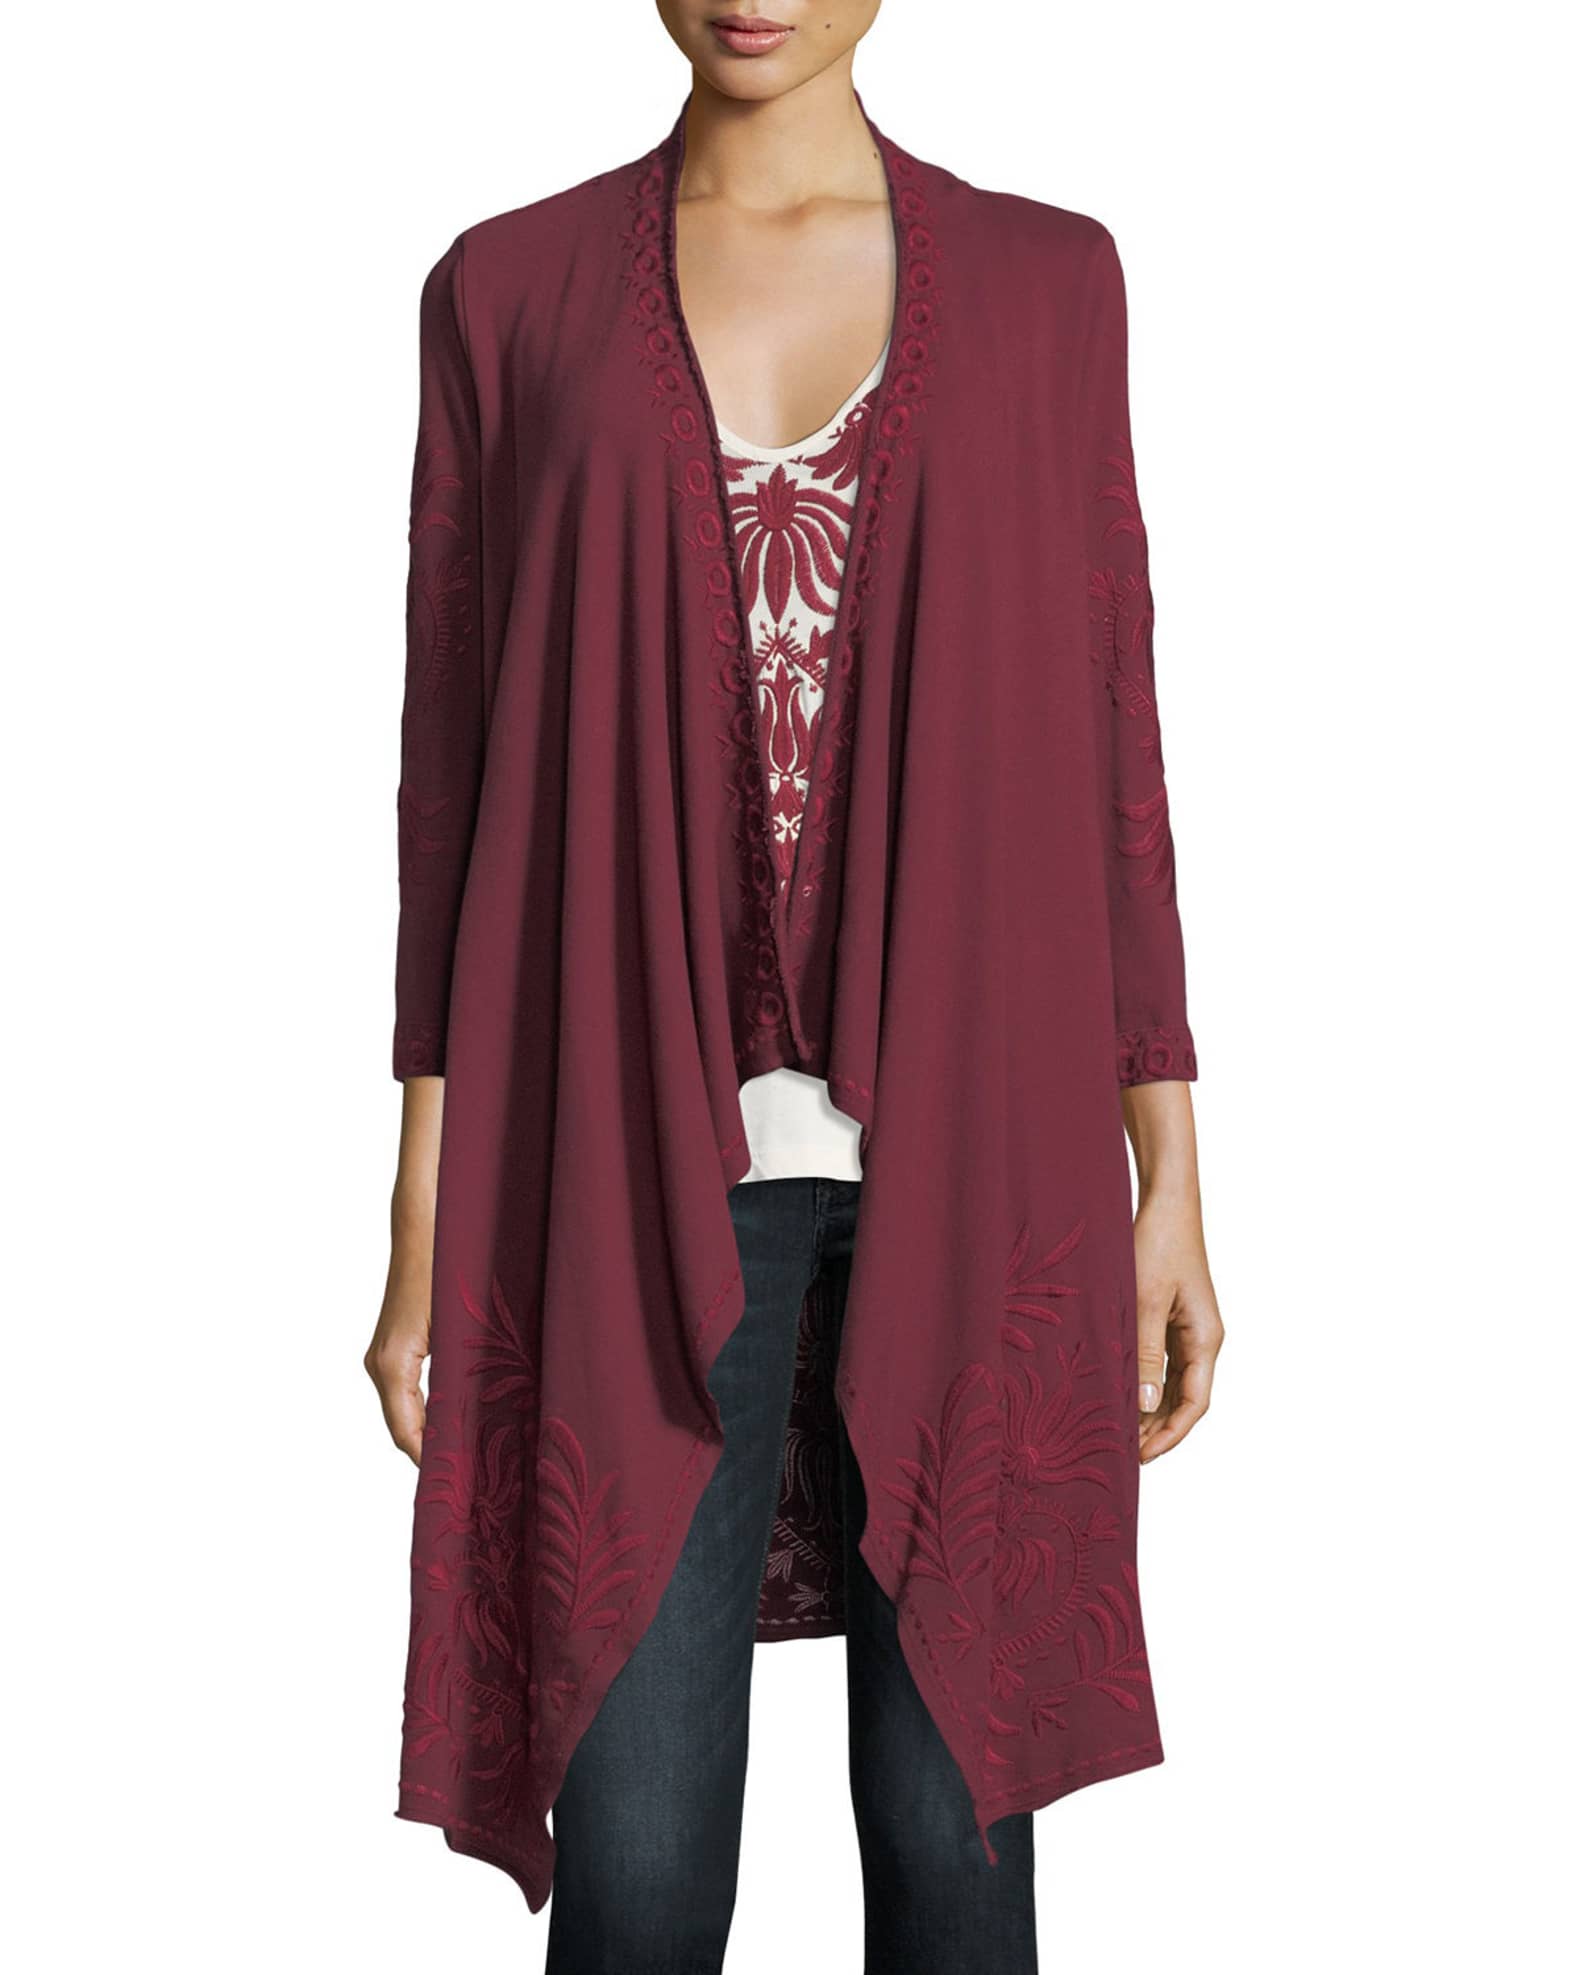 Saskla Embroidered French Terry Cardigan and Matching Items | Neiman Marcus